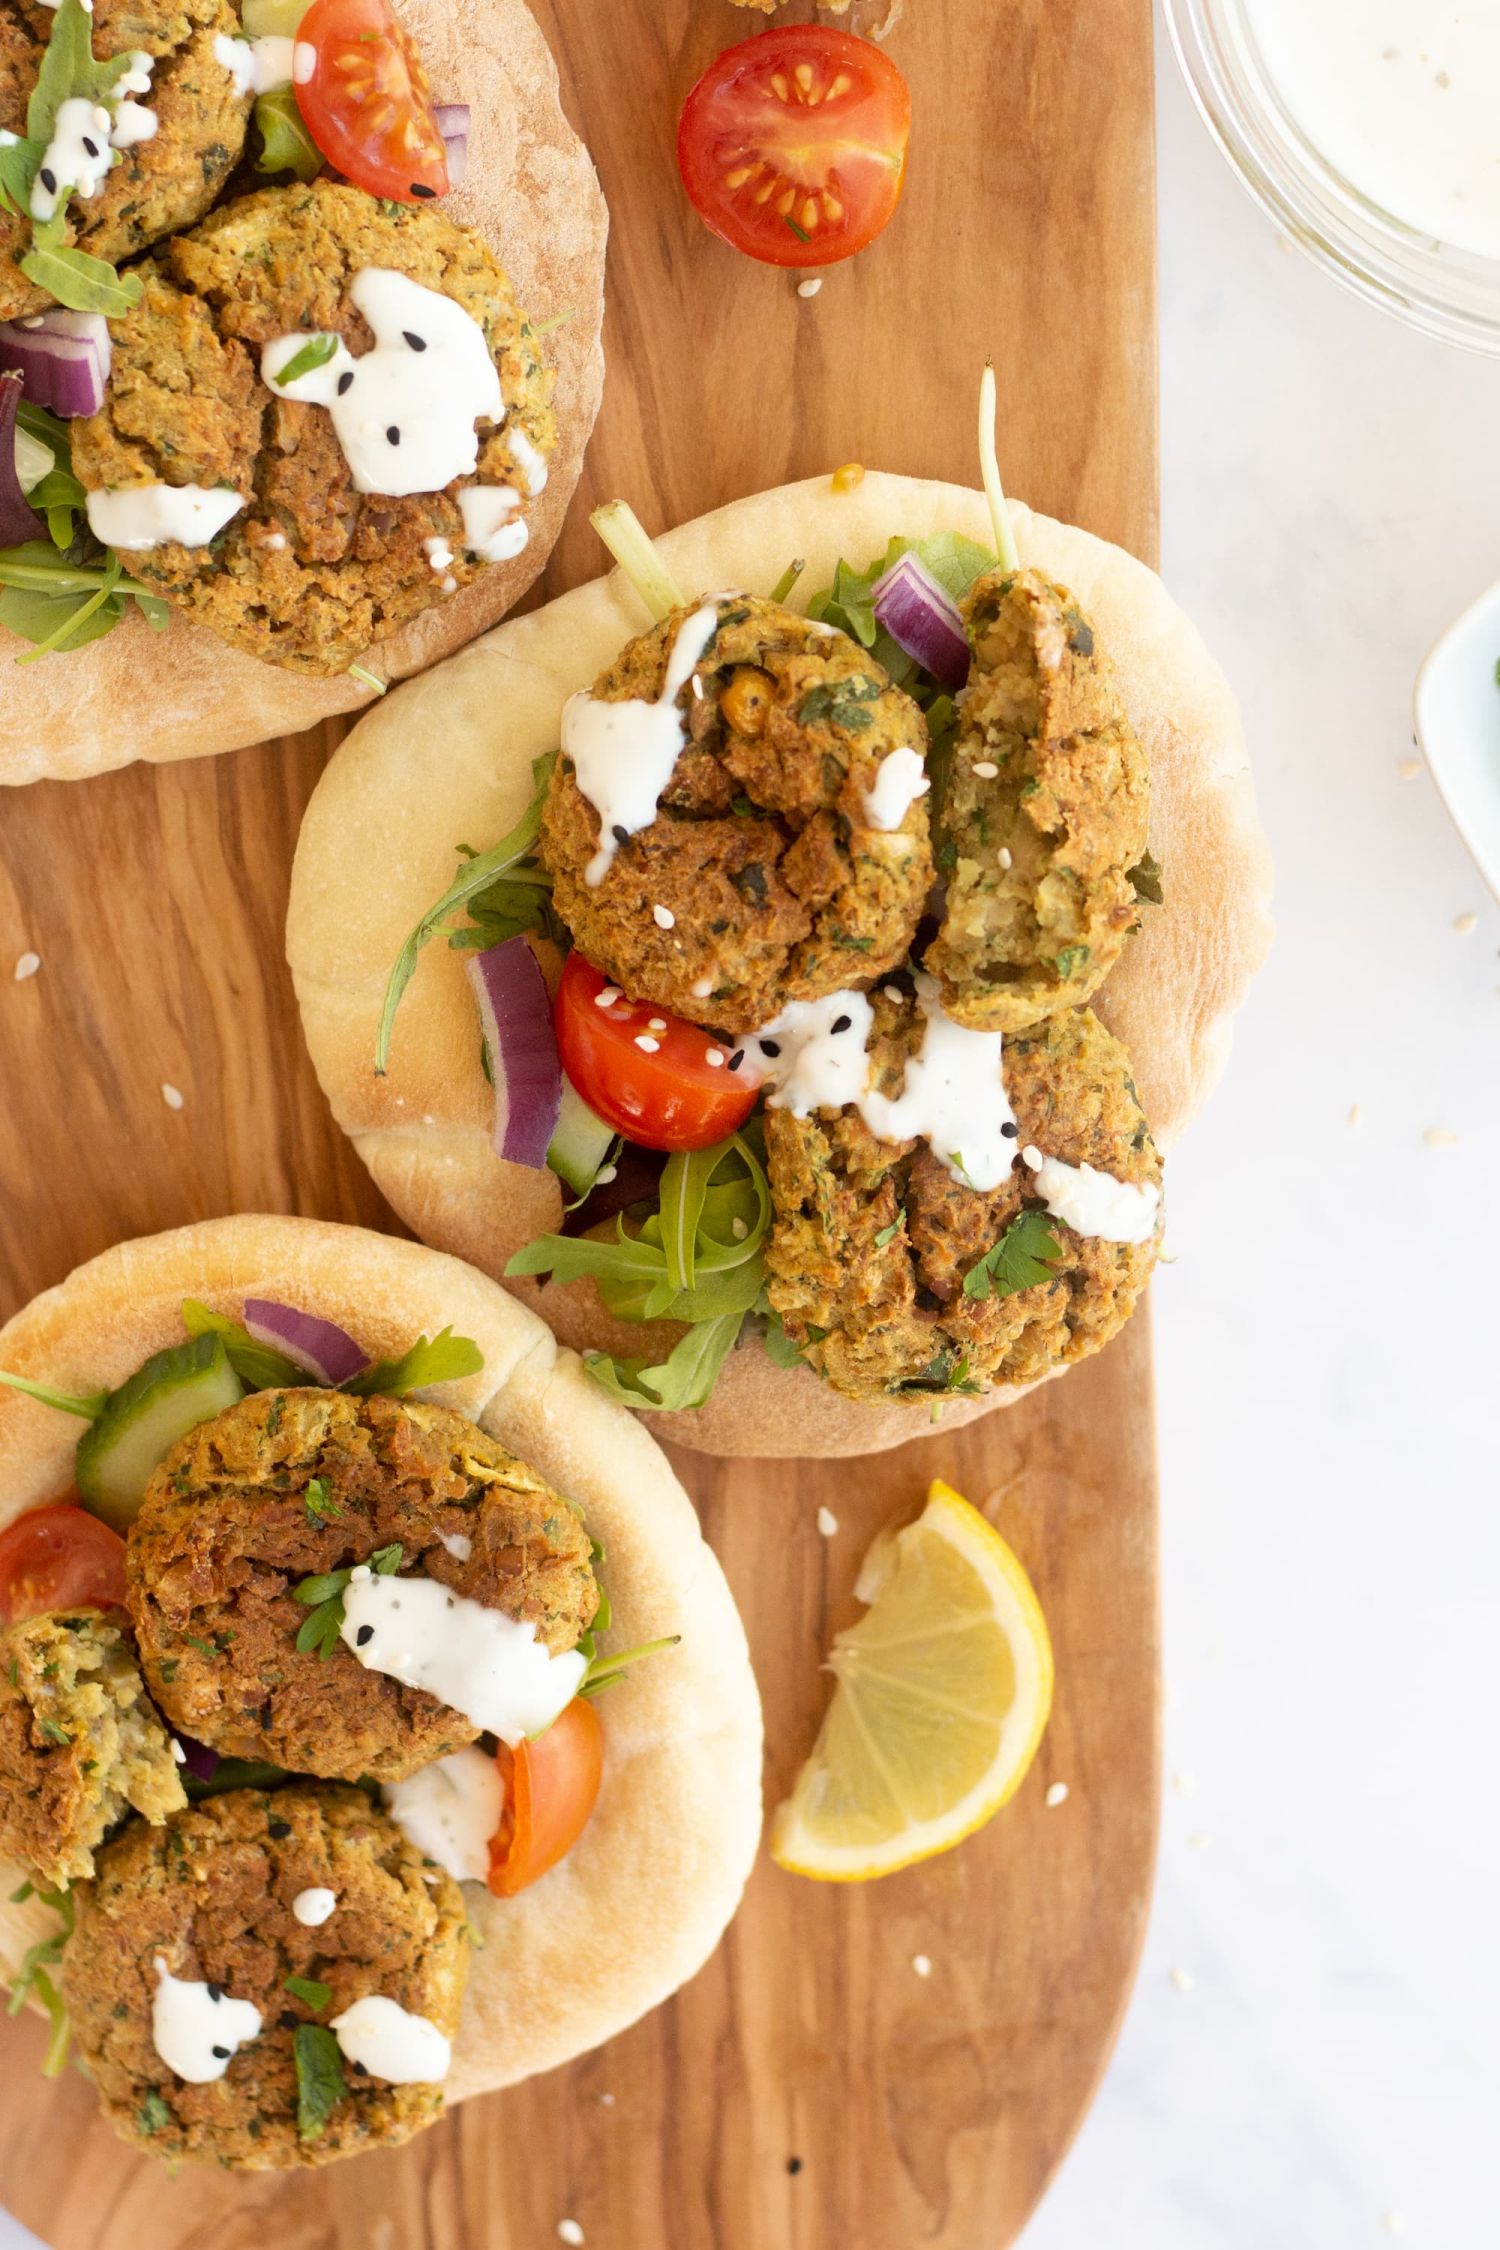 Crispy baked falafel served on pita bread with cucumber, tomato, lettuce, red onion, and tahini.